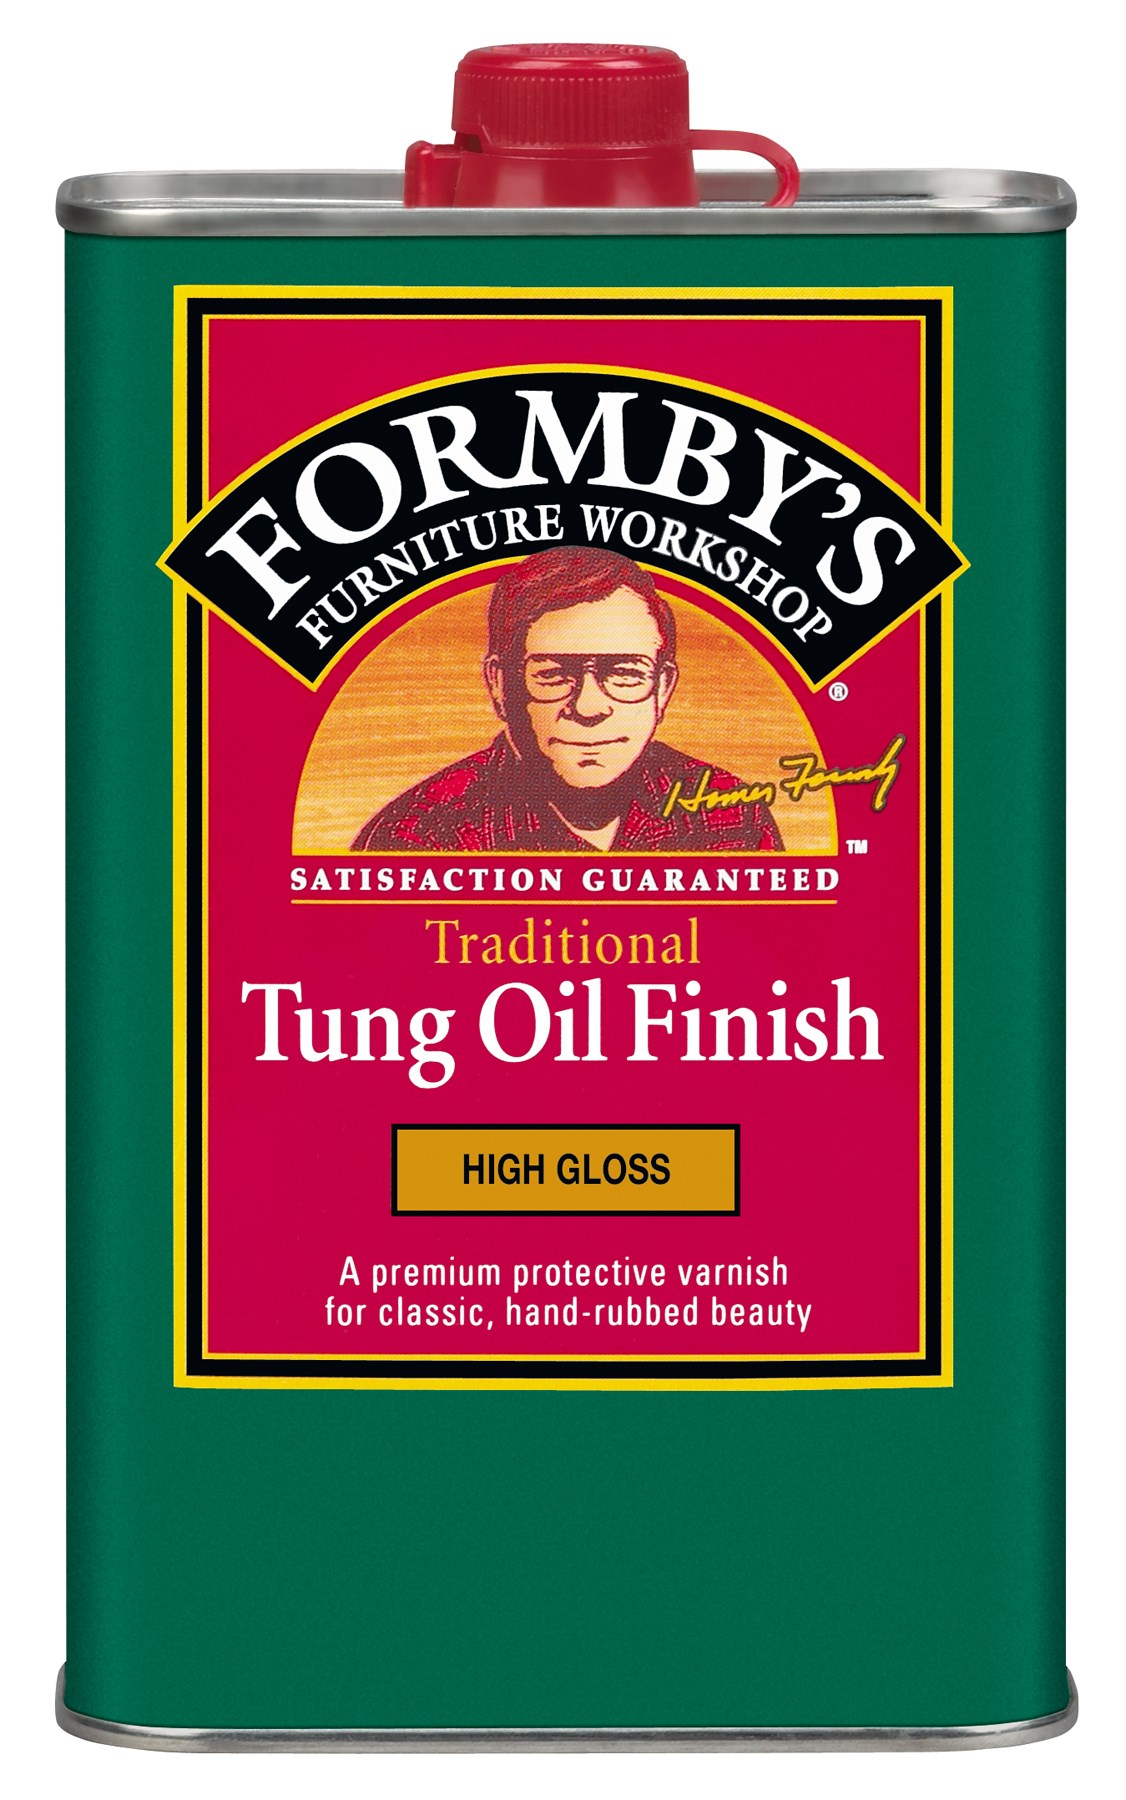 Formbys 30100 32 Oz High Gloss Tung Oil Finish - image 1 of 1